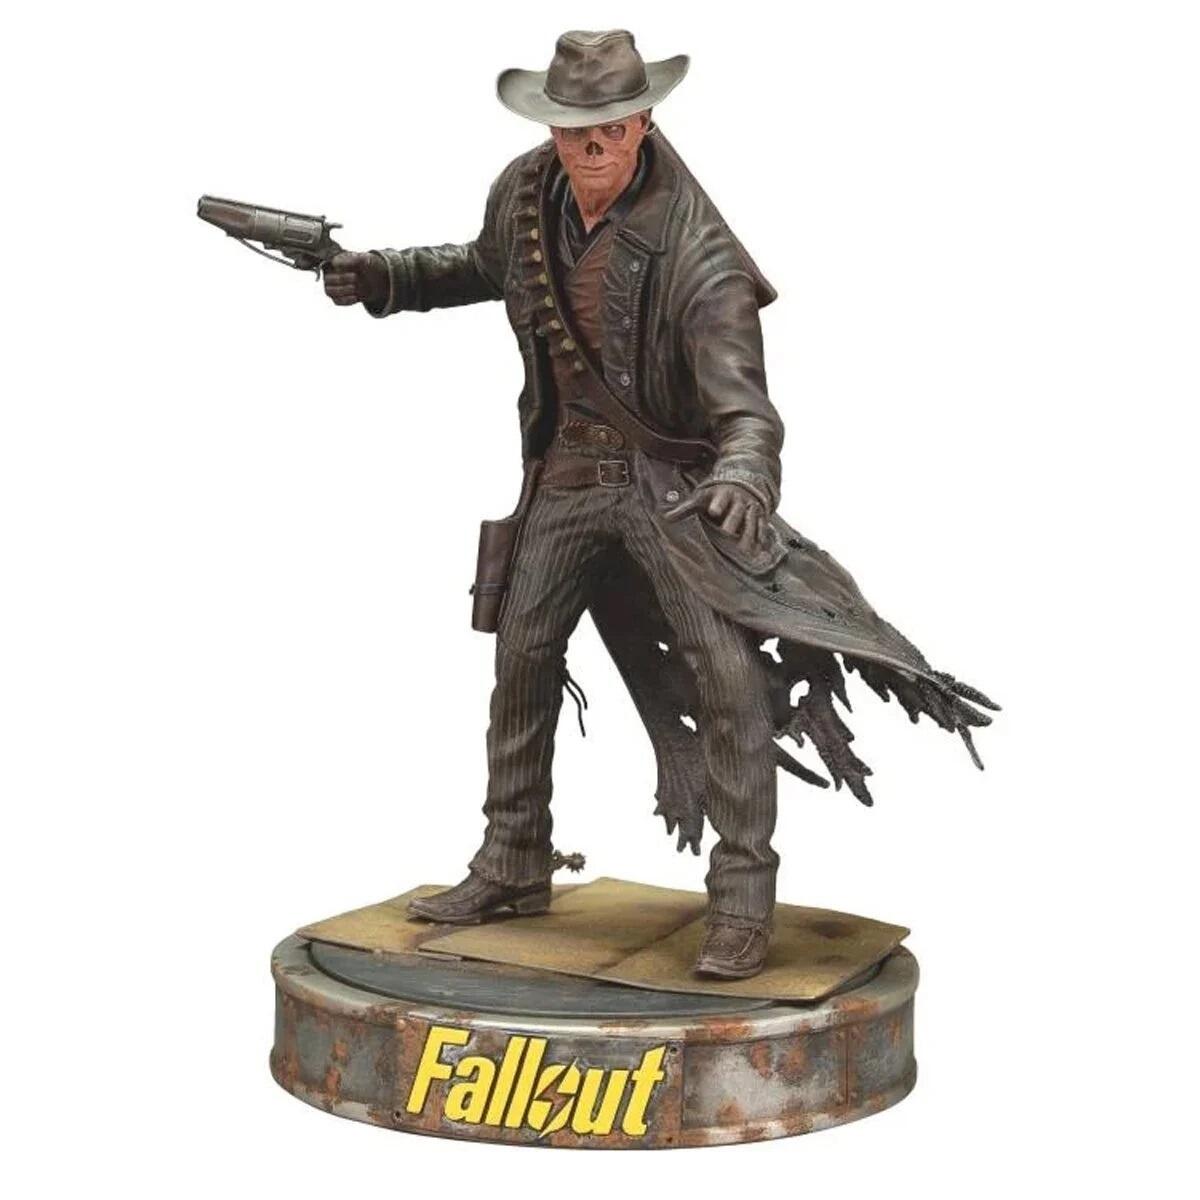 Fallout The Ghoul (Amazon Show Version) Deluxe 8 Inch Figure